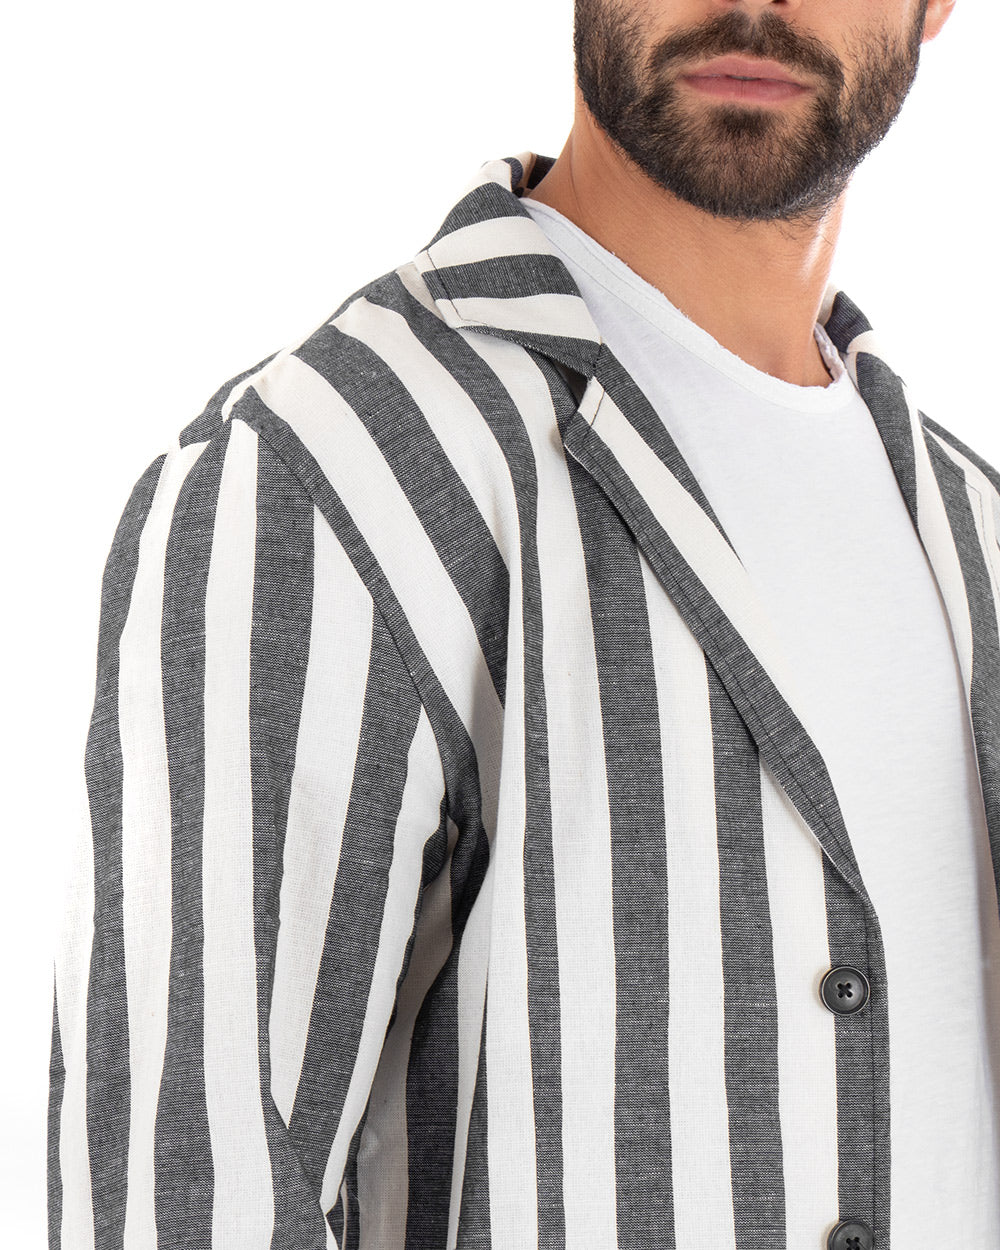 Men's Shirt Jacket With Collar Long Sleeve Tailored Linen Striped Black GIOSAL-G2564A